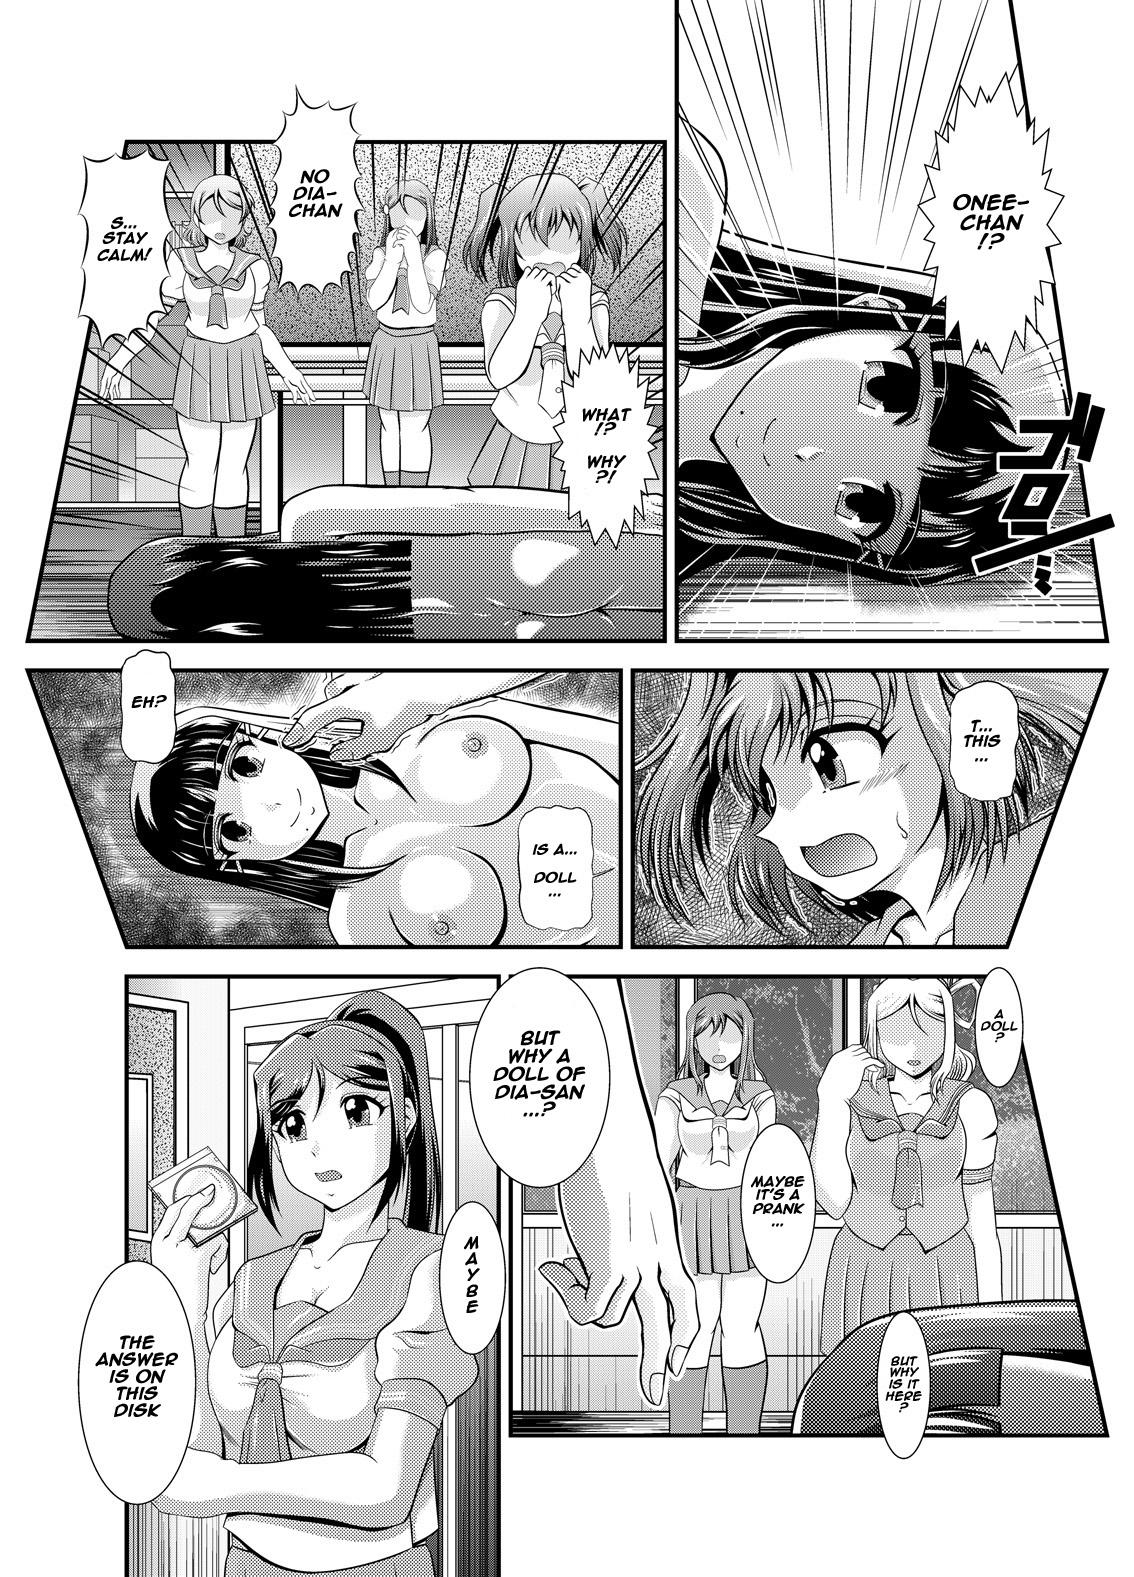 First Time ProjectAqours EP01DIAMONDS - Love live sunshine Fucking - Page 5